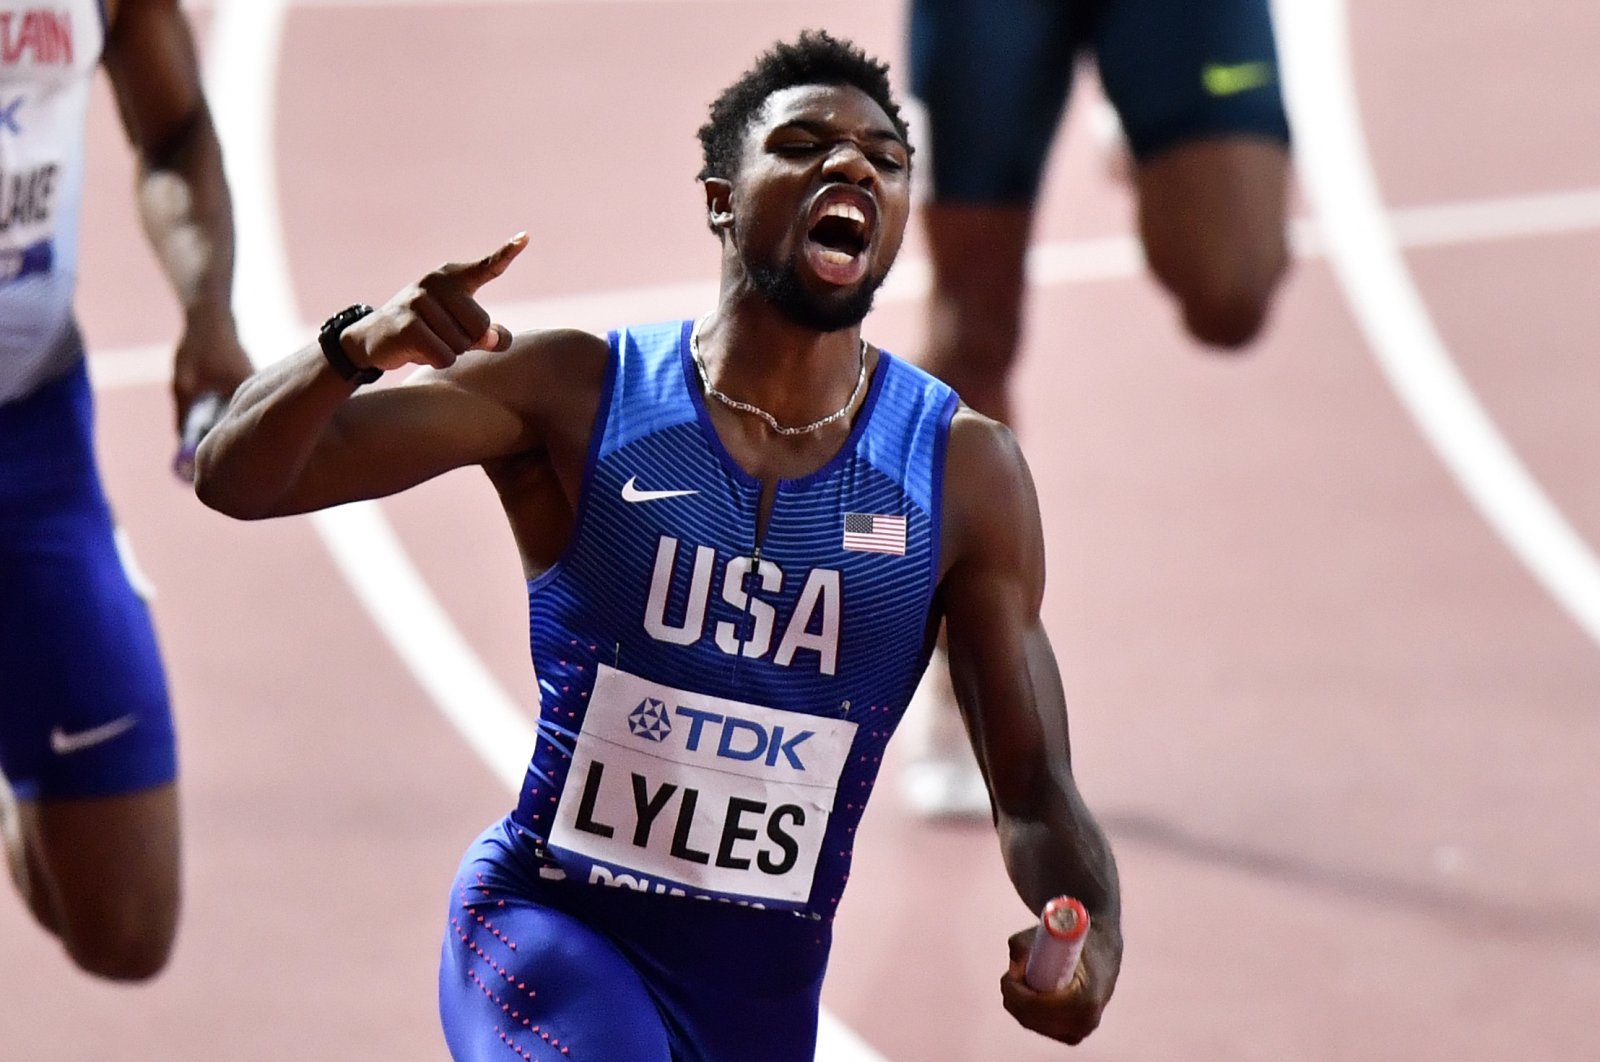 Noah Lyles of the United States reacts after winning the men's 4x100 meter relay final during the World Athletics Championships in Doha, Qatar, Oct. 5, 2019. (AP Photo)